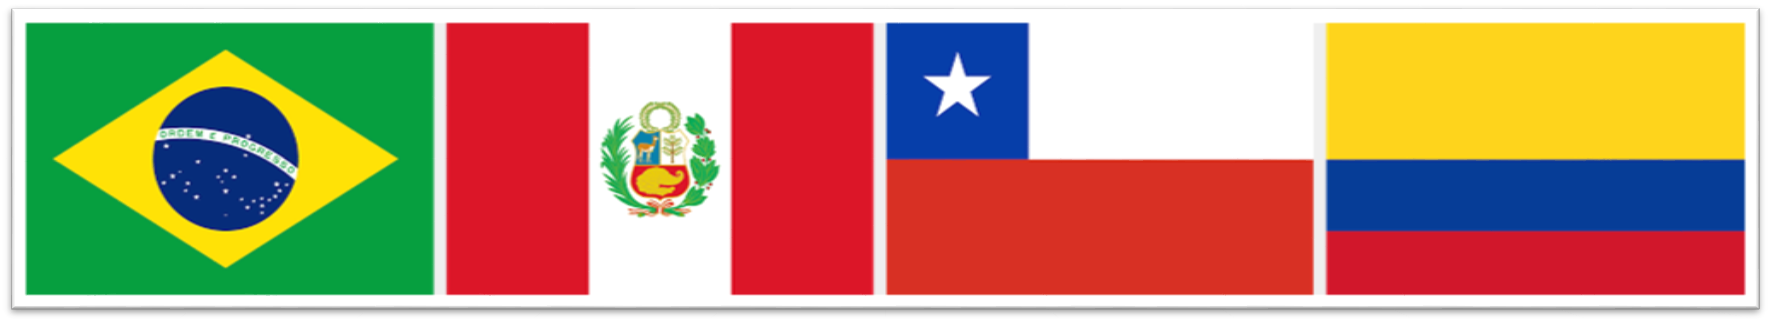 brazil_peru_chile_colombia-flags.png